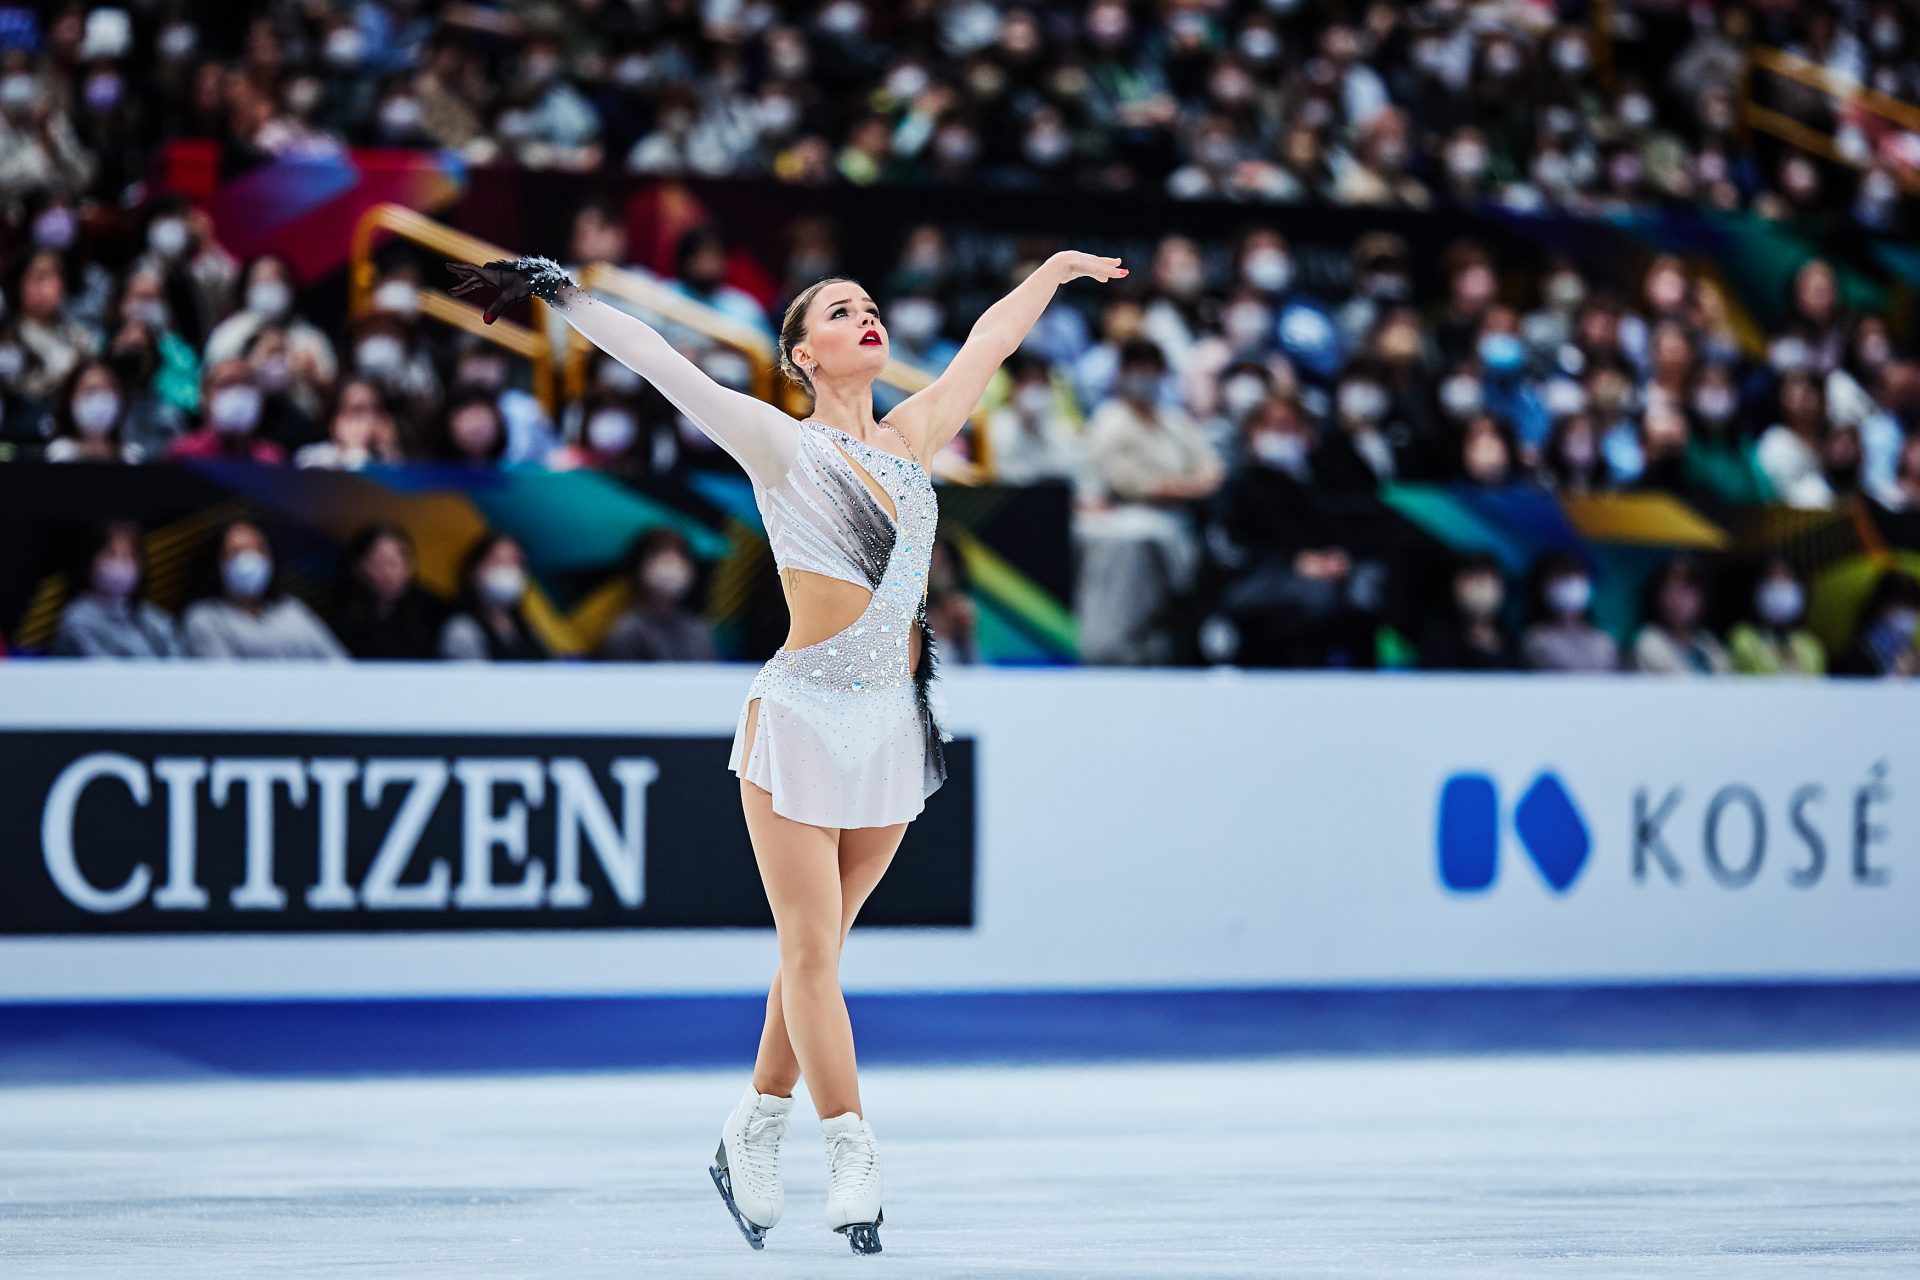 Taking the figure skating world by storm